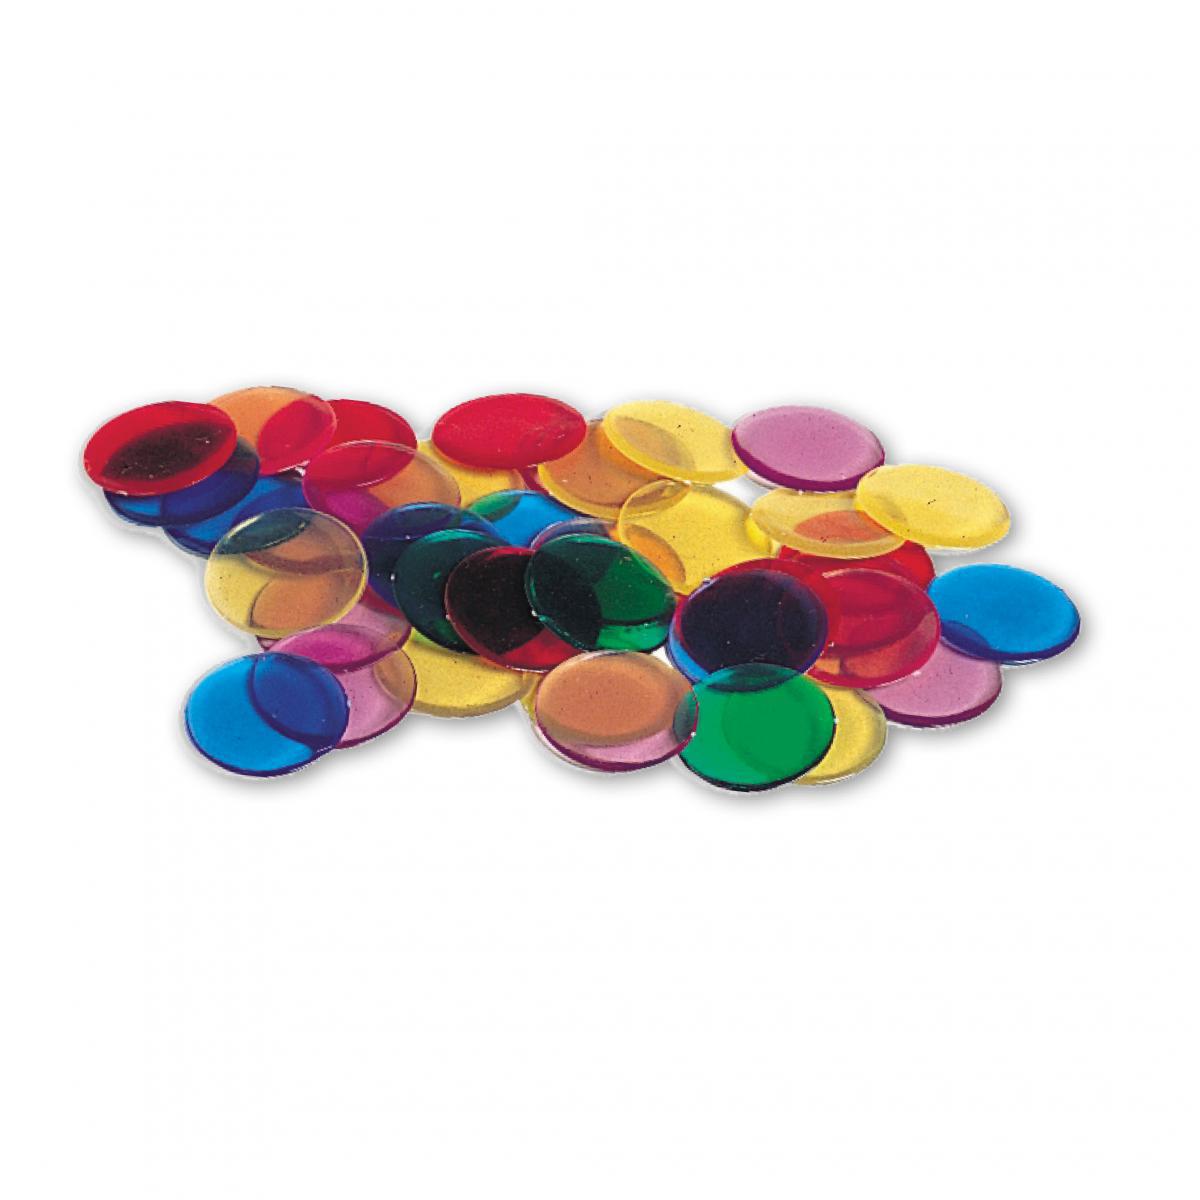  Transparent Colour Counting Chips 